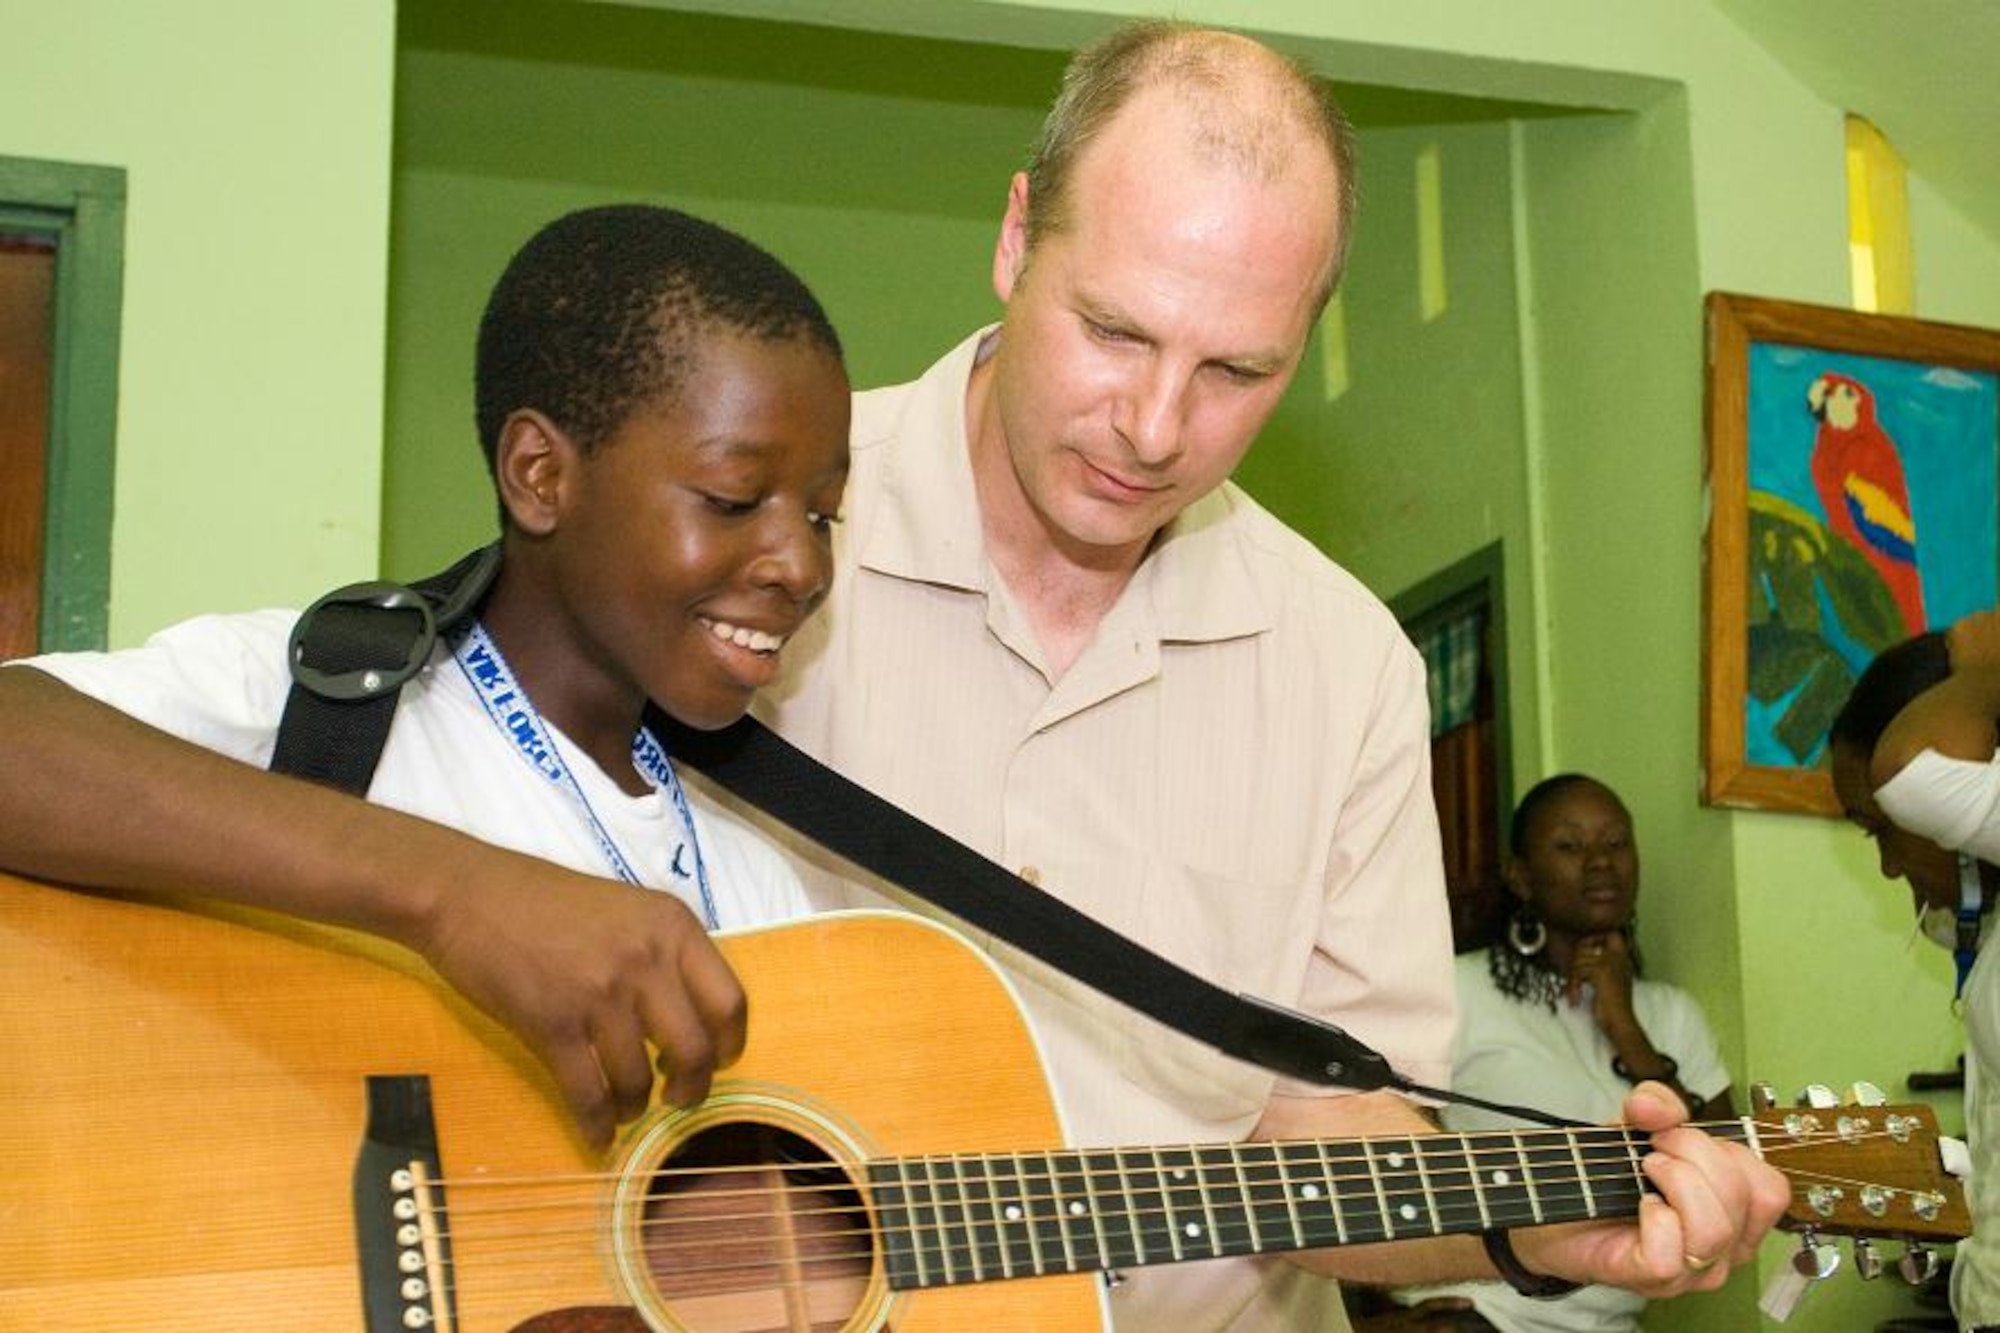 VICTORIA, Grenada -- Tech Sgt. Stephen Brannen, a guitar player with the Air Force Academy Band “Blue Steel,” instructs an orphan at Father Mallaghan’s Home for Boys in Victoria, Grenada June 1.  Blue Steel spent the day with boys at the home before performing a public concert in the center of the village.  The community outreach event is part of Operation Southern Partner, an Air Forces Southern-led event aimed at strengthening partnerships with nations in the U.S. Southern Command area of focus through mil-to-mil subject matter exchanges.  In addition to the exchange program, Airmen also had the opportunity to volunteer at various charitable and community organizations in each host nation.  (Photo courtesy of Sagar Pathak of HorizontalRain.com)